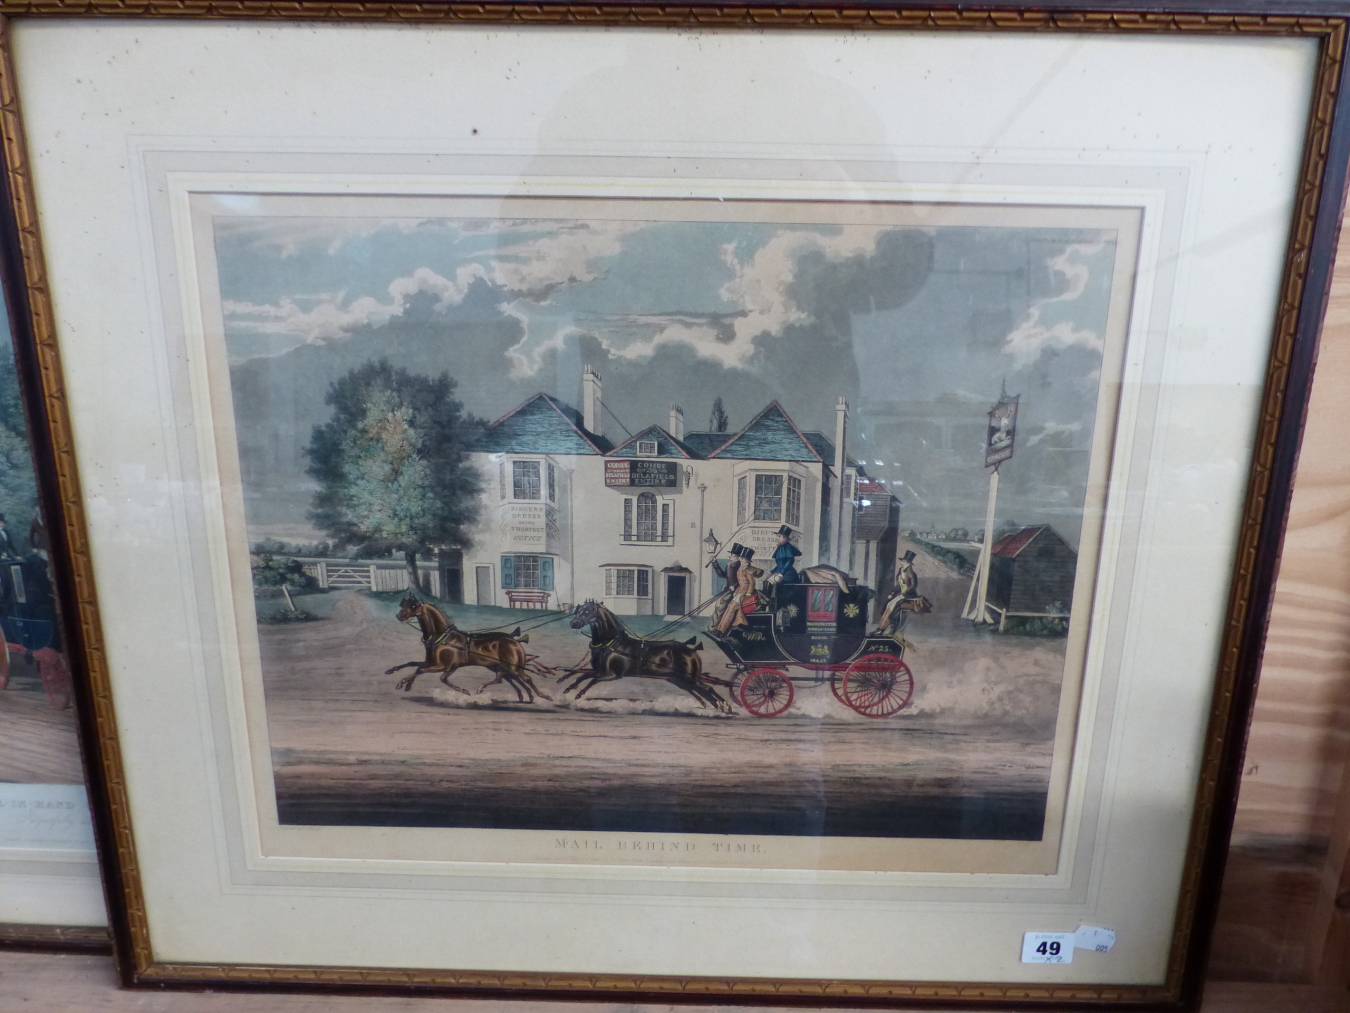 TWO ANTIQUE COLOURED PRINTS AFTER J POLLARD "MAIL BEHIND TIME" AND "THE FOUR IN HAND CLUB, HYDE